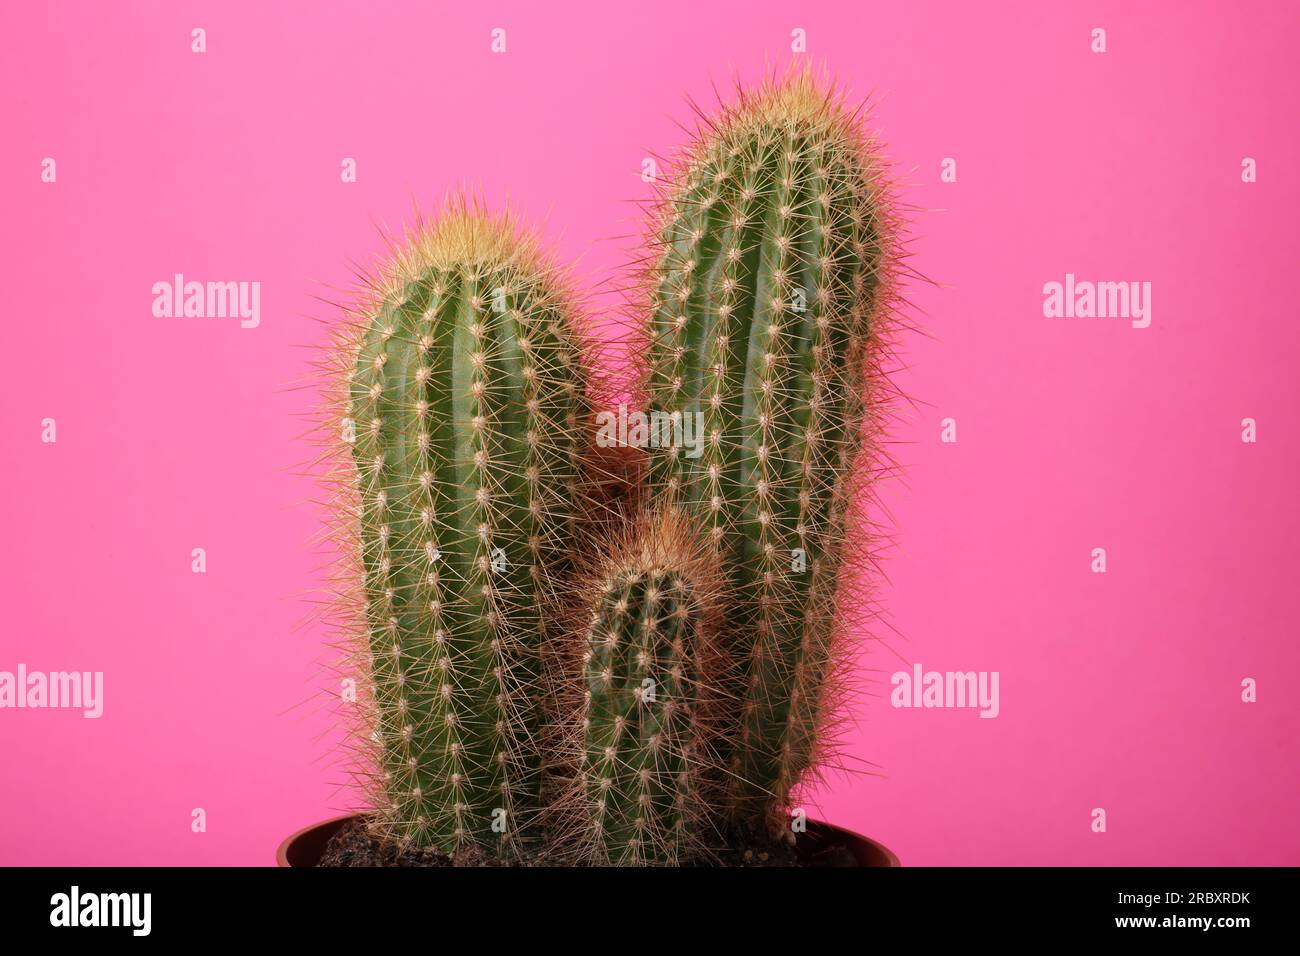 Beautiful green cactus on pink background. Tropical plant Stock Photo